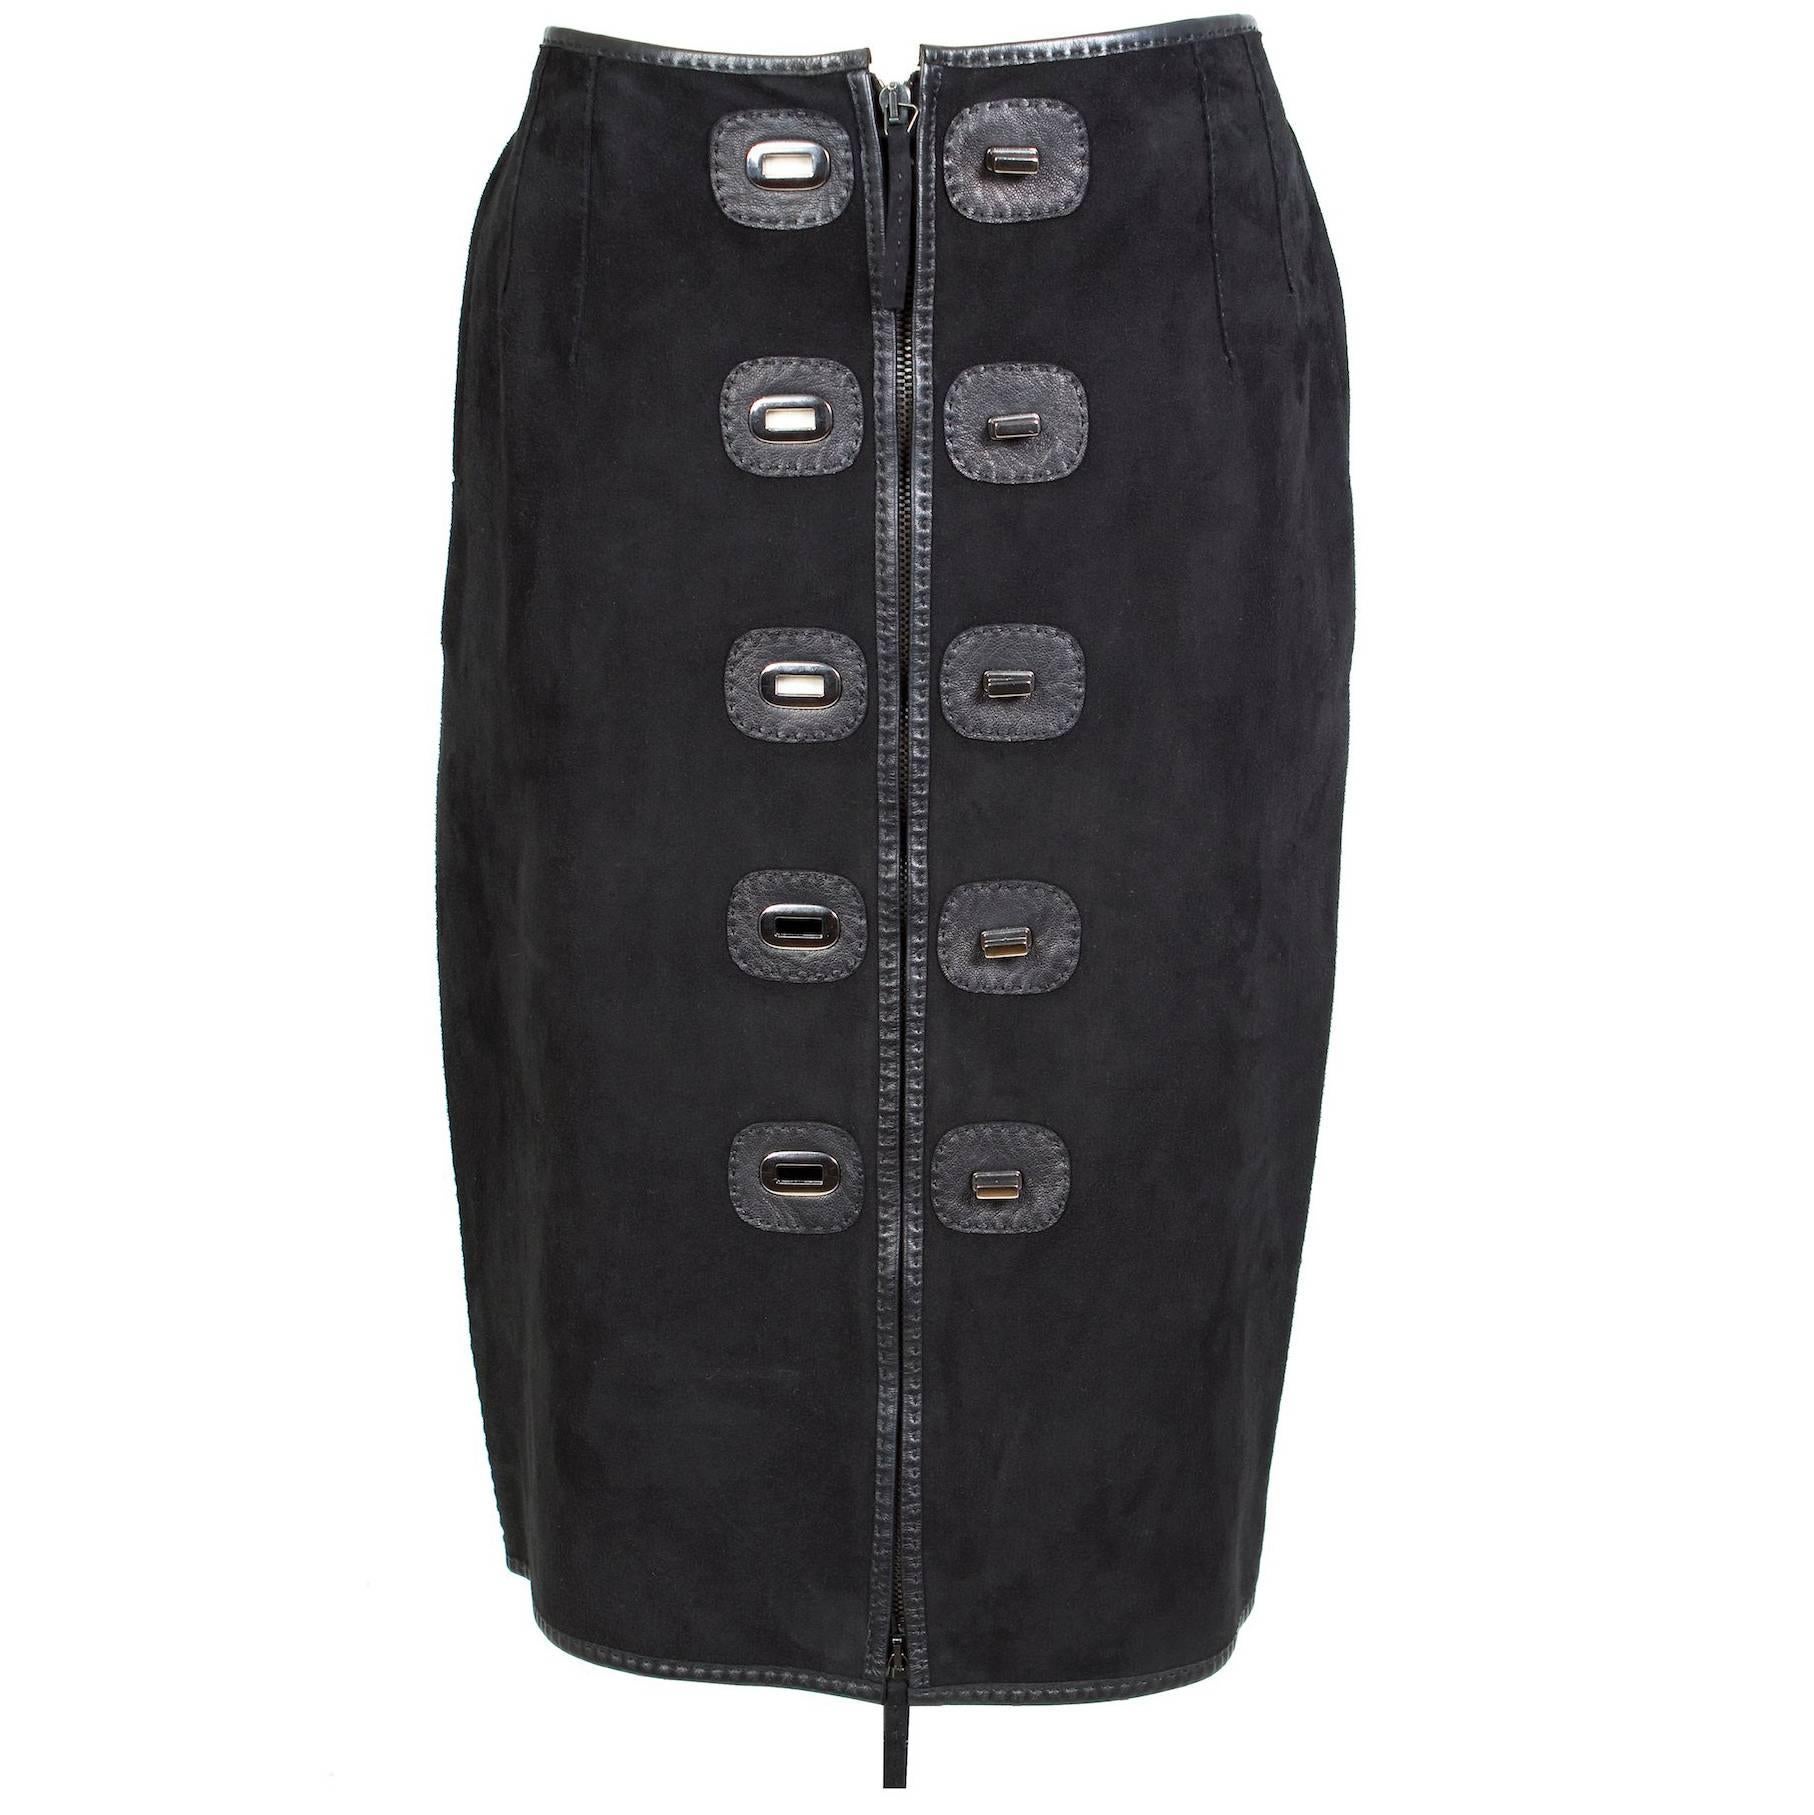 Jean Paul Gaultier Suede Skirt With Twist Lock Closures and Zipper circa 1990s